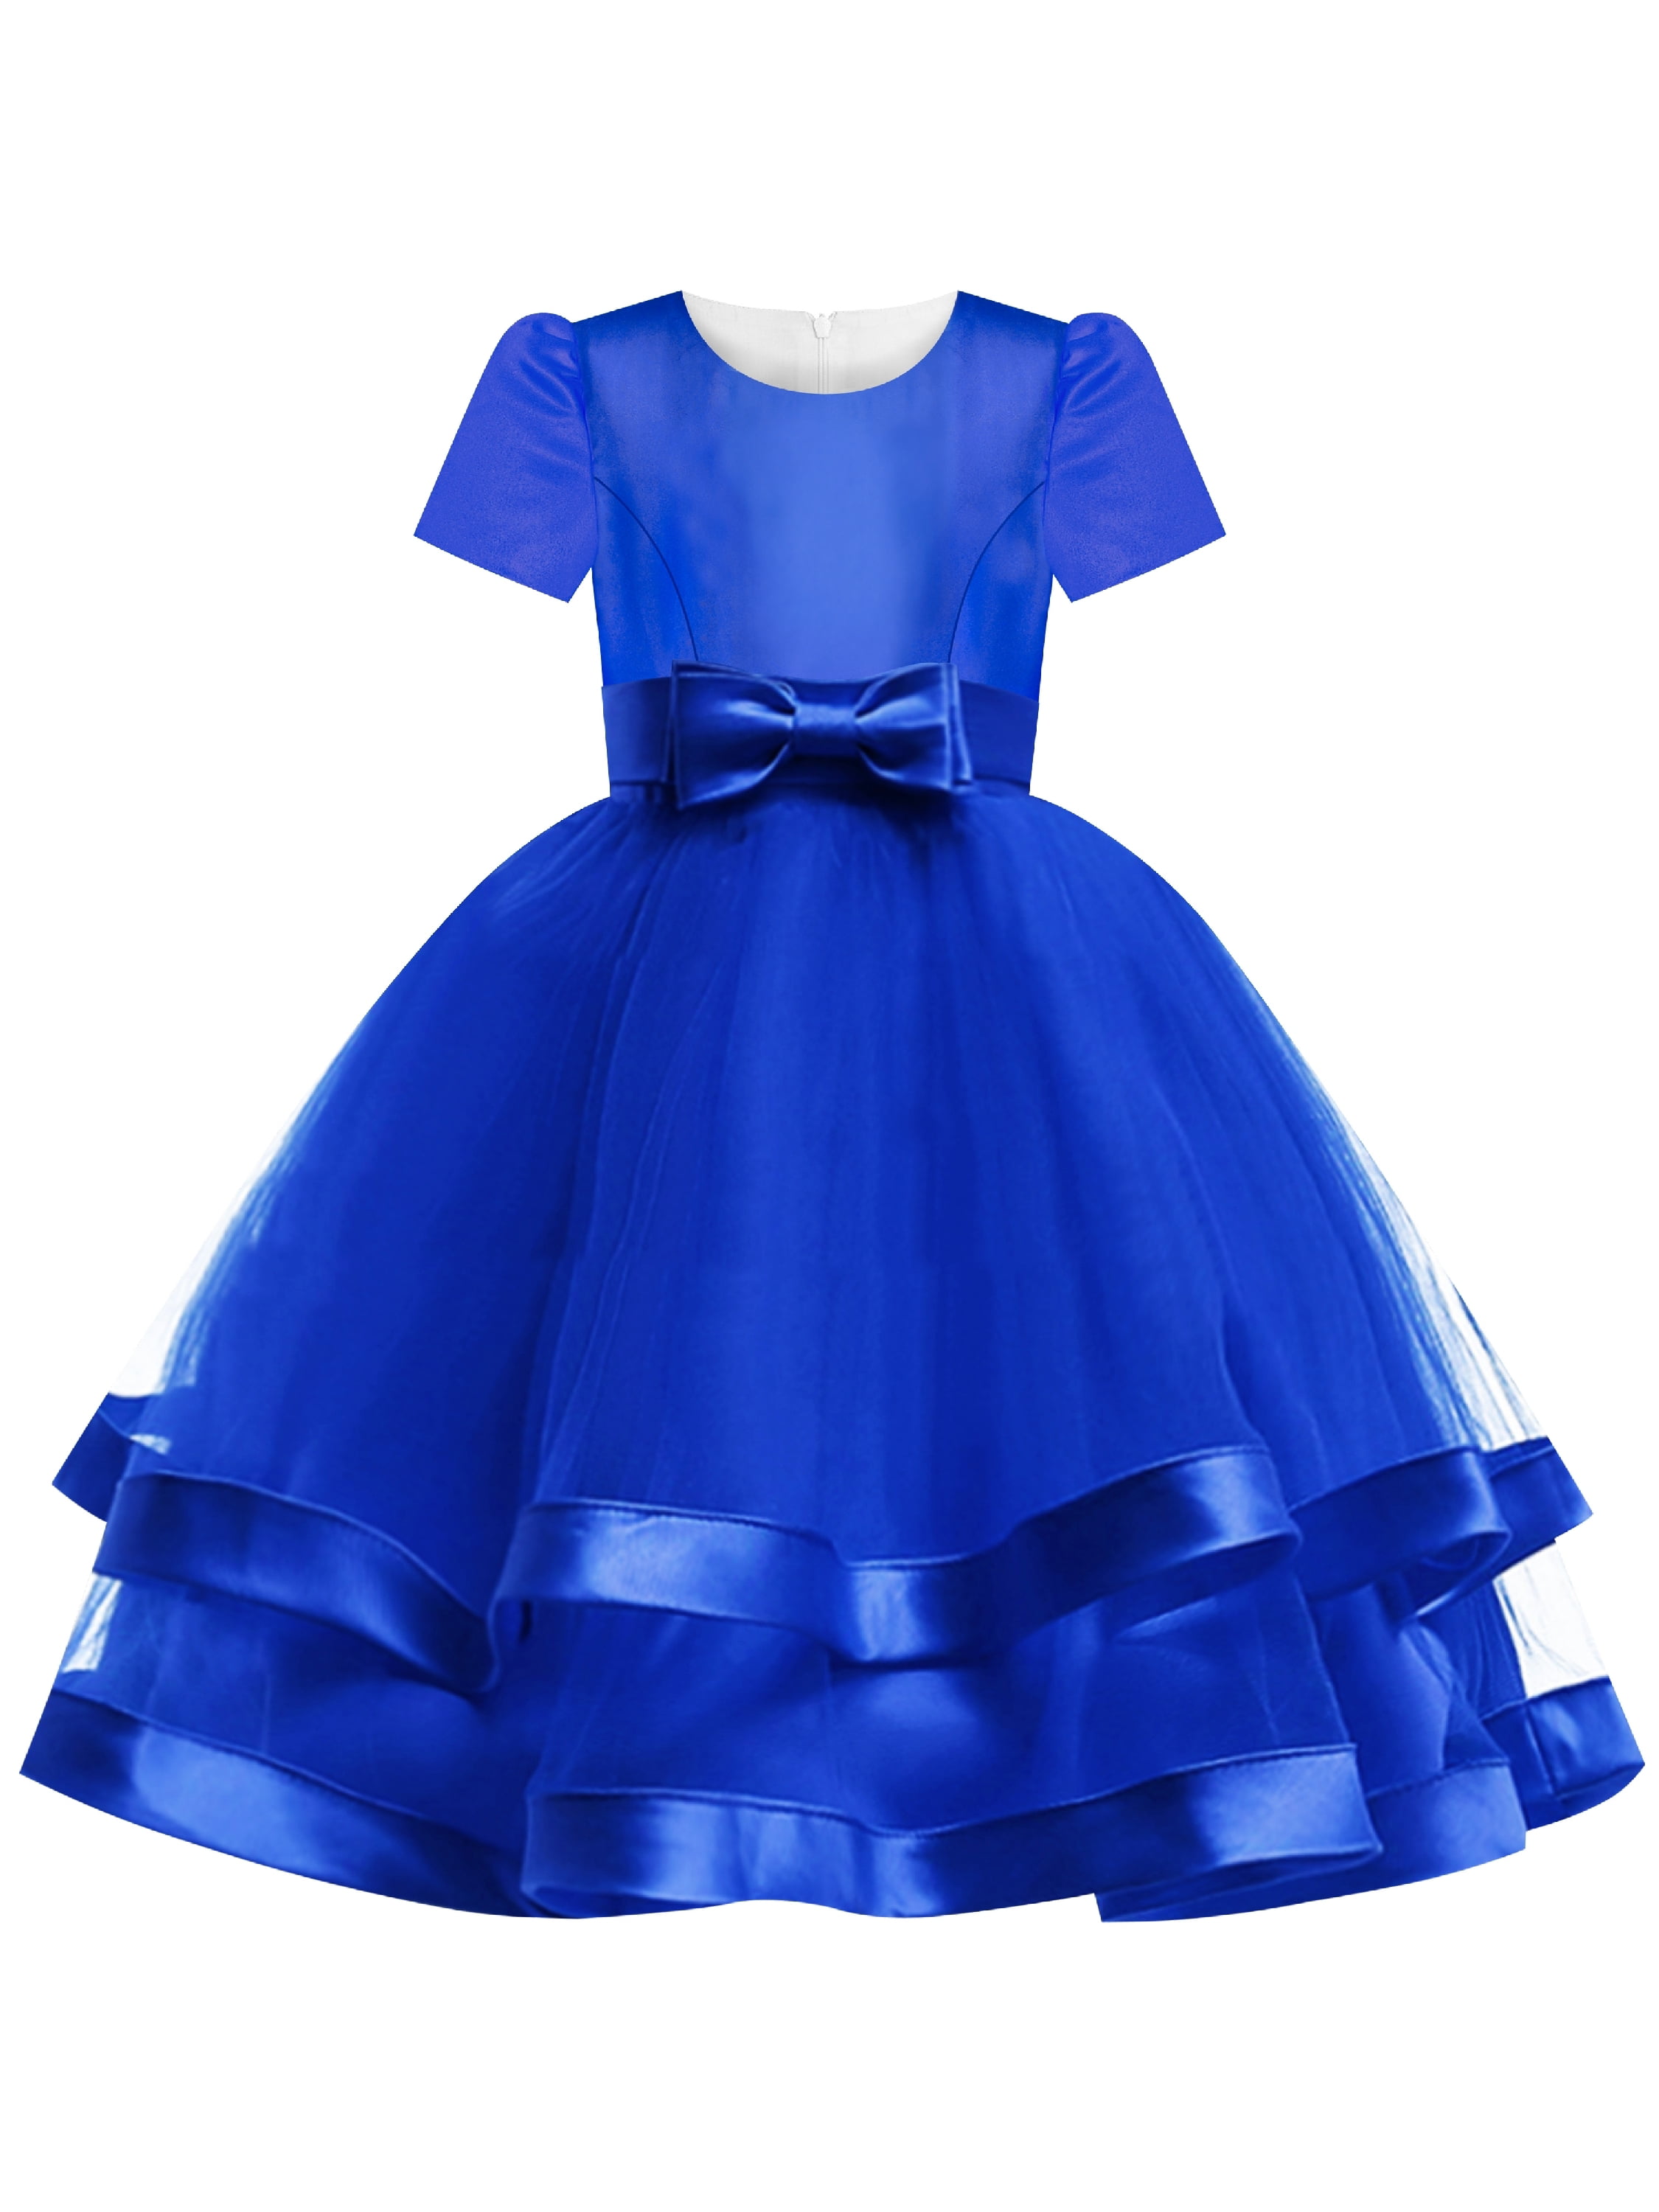 Sunny Fashion - Girls Dress Royal Blue Ball Gown Wedding Party Pageant ...